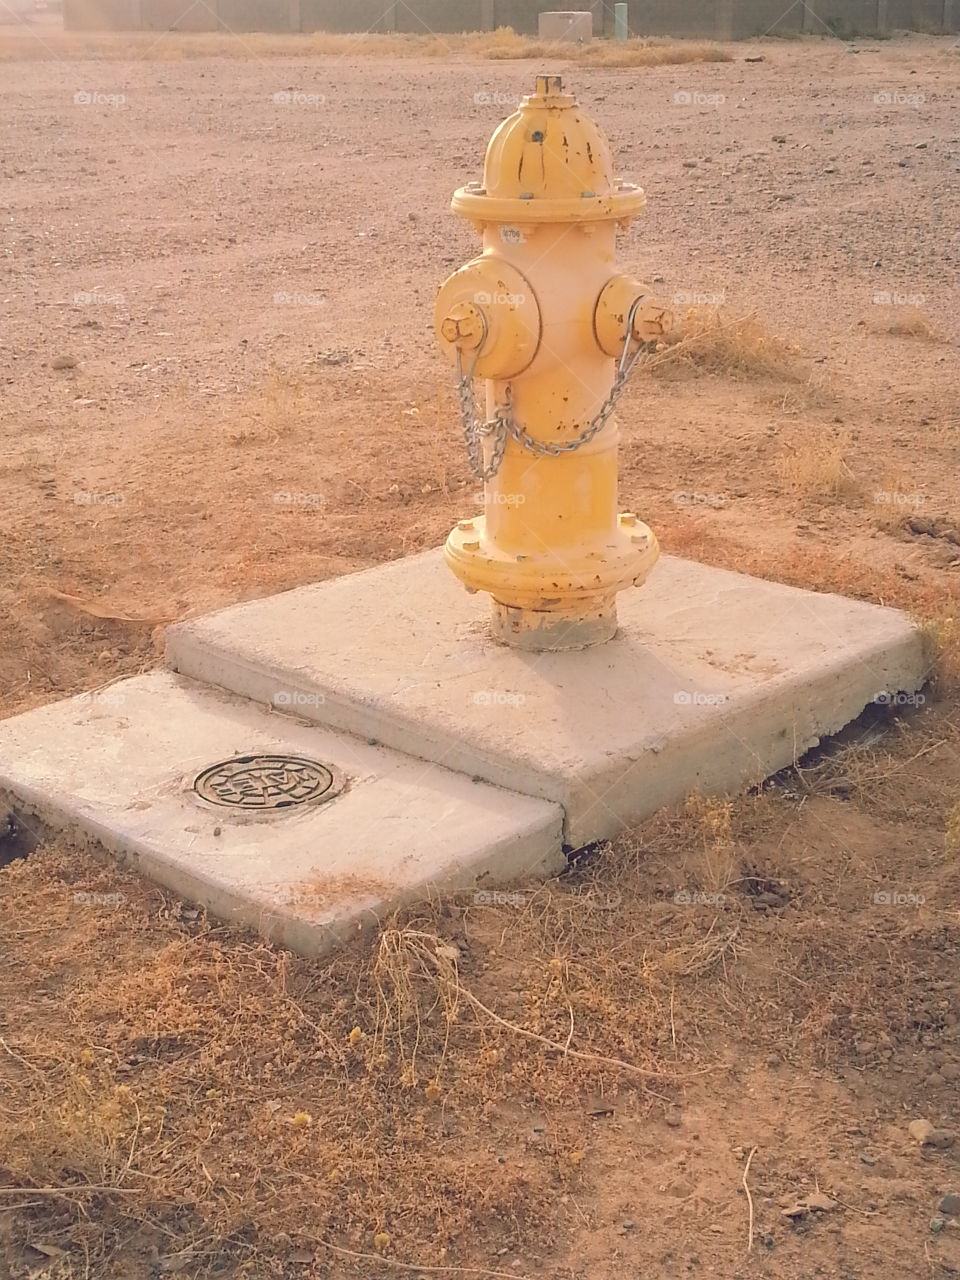 View of fire hydrant